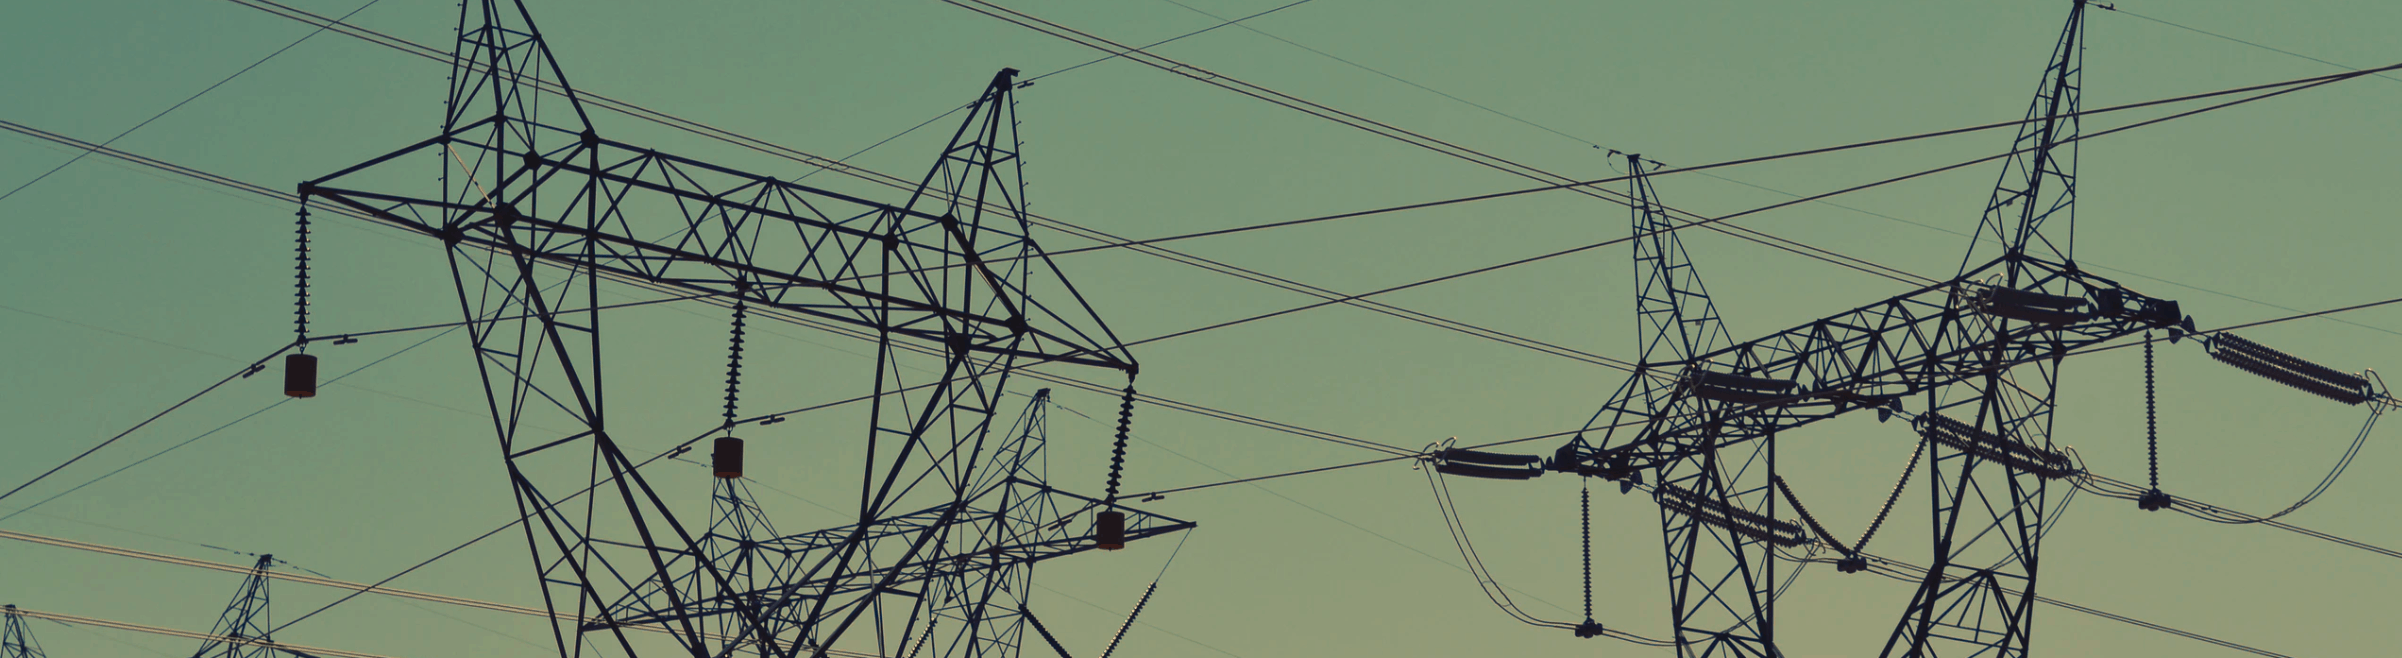 electricity providers database